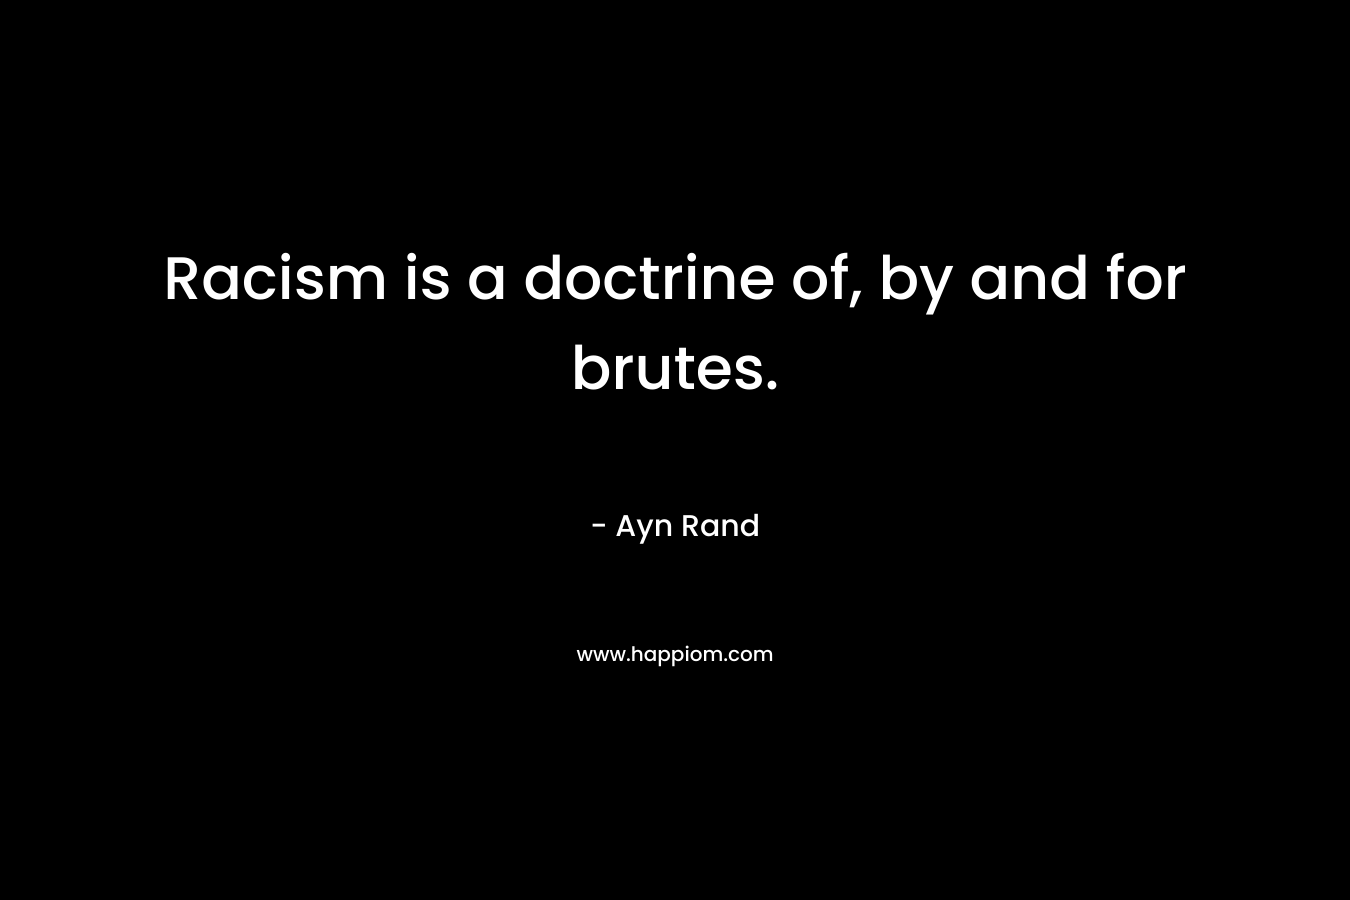 Racism is a doctrine of, by and for brutes. – Ayn Rand